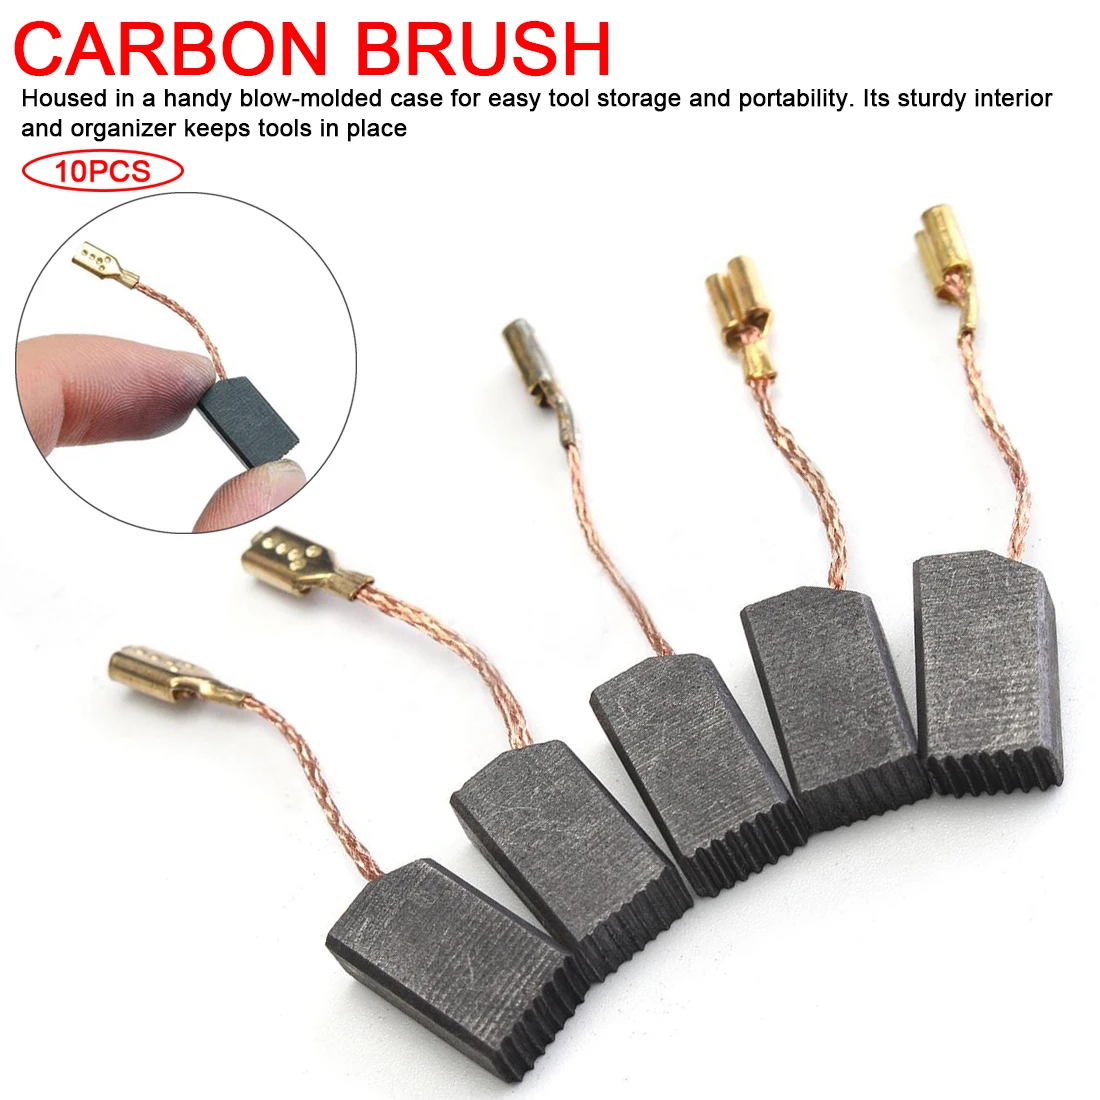 10x 15 x 8 x 5mm Power Tool Motor Carbon Brush Replacement 2 